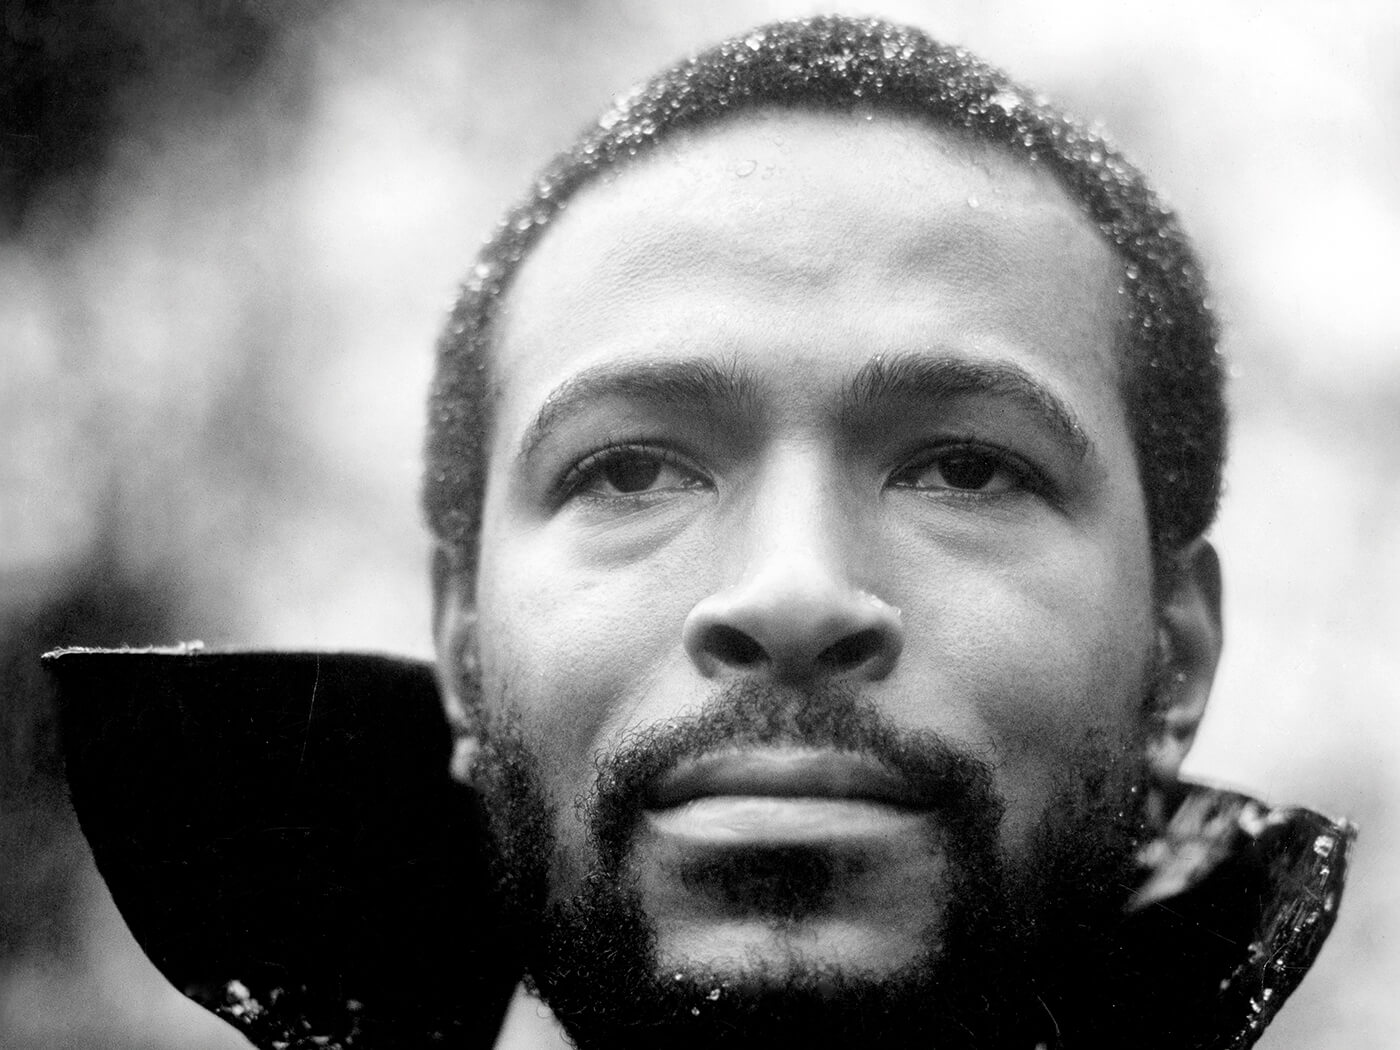 UMe Marks 45th Anniversary Of Marvin Gaye's What's Going On With